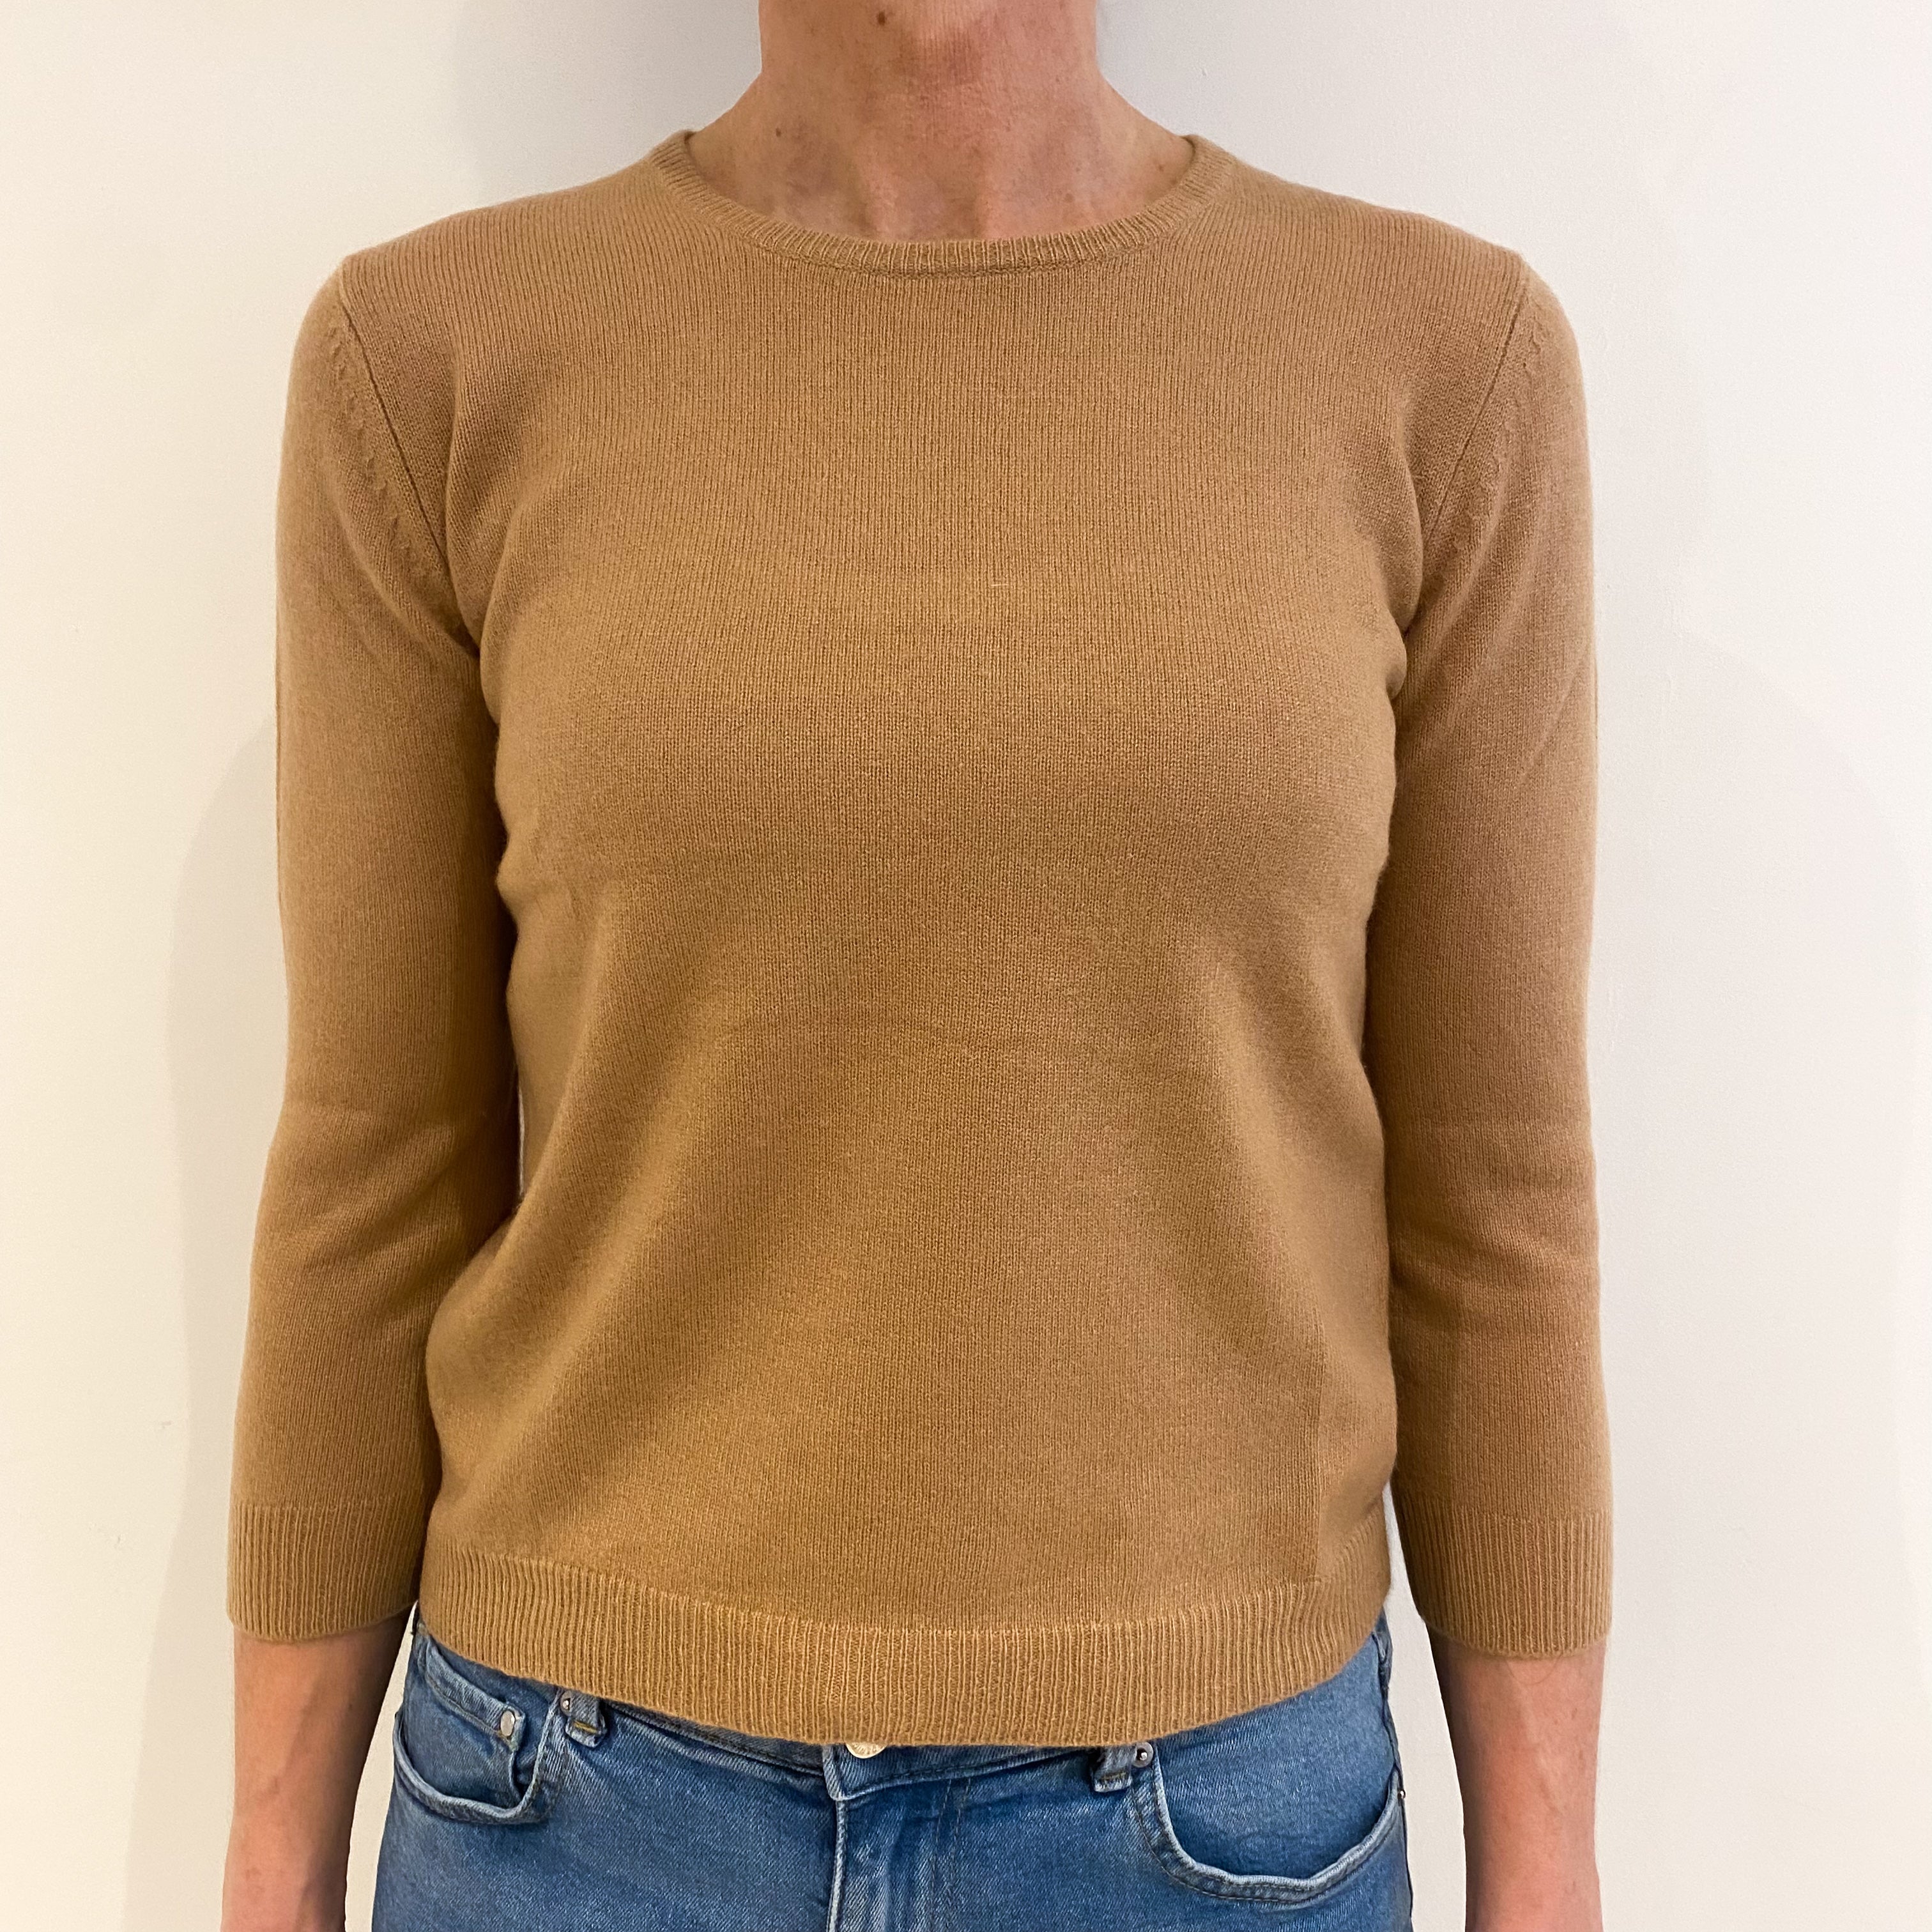 Camel Brown 3/4 Sleeve Cashmere Crew Neck Jumper Small